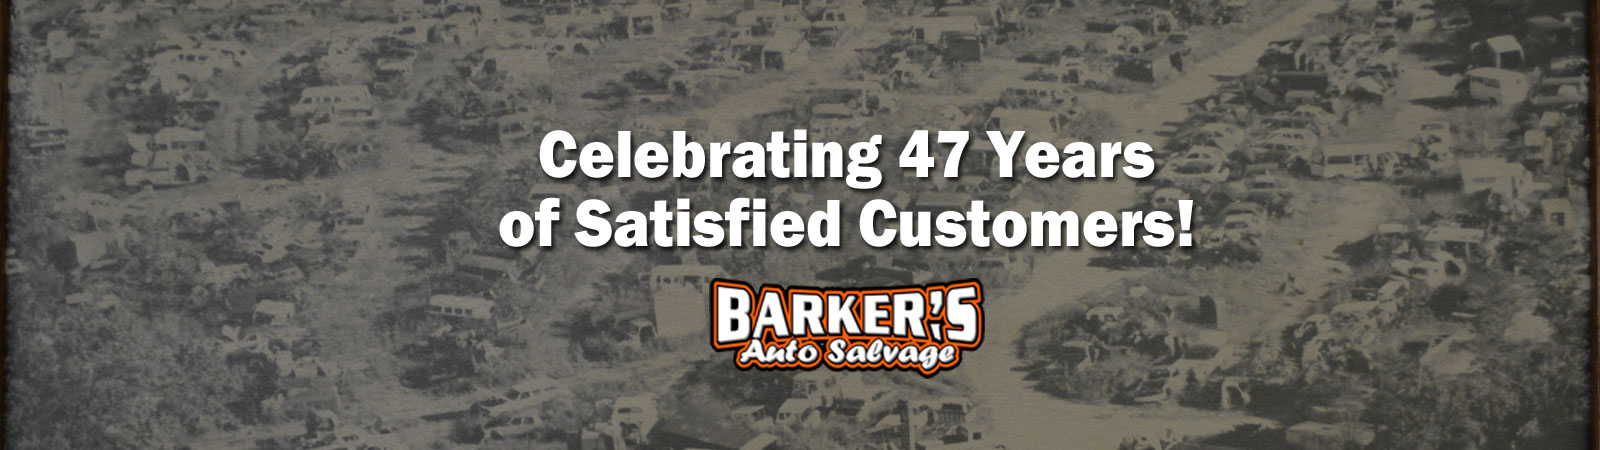 45 Years of best prices on used auto parts in VA & NC